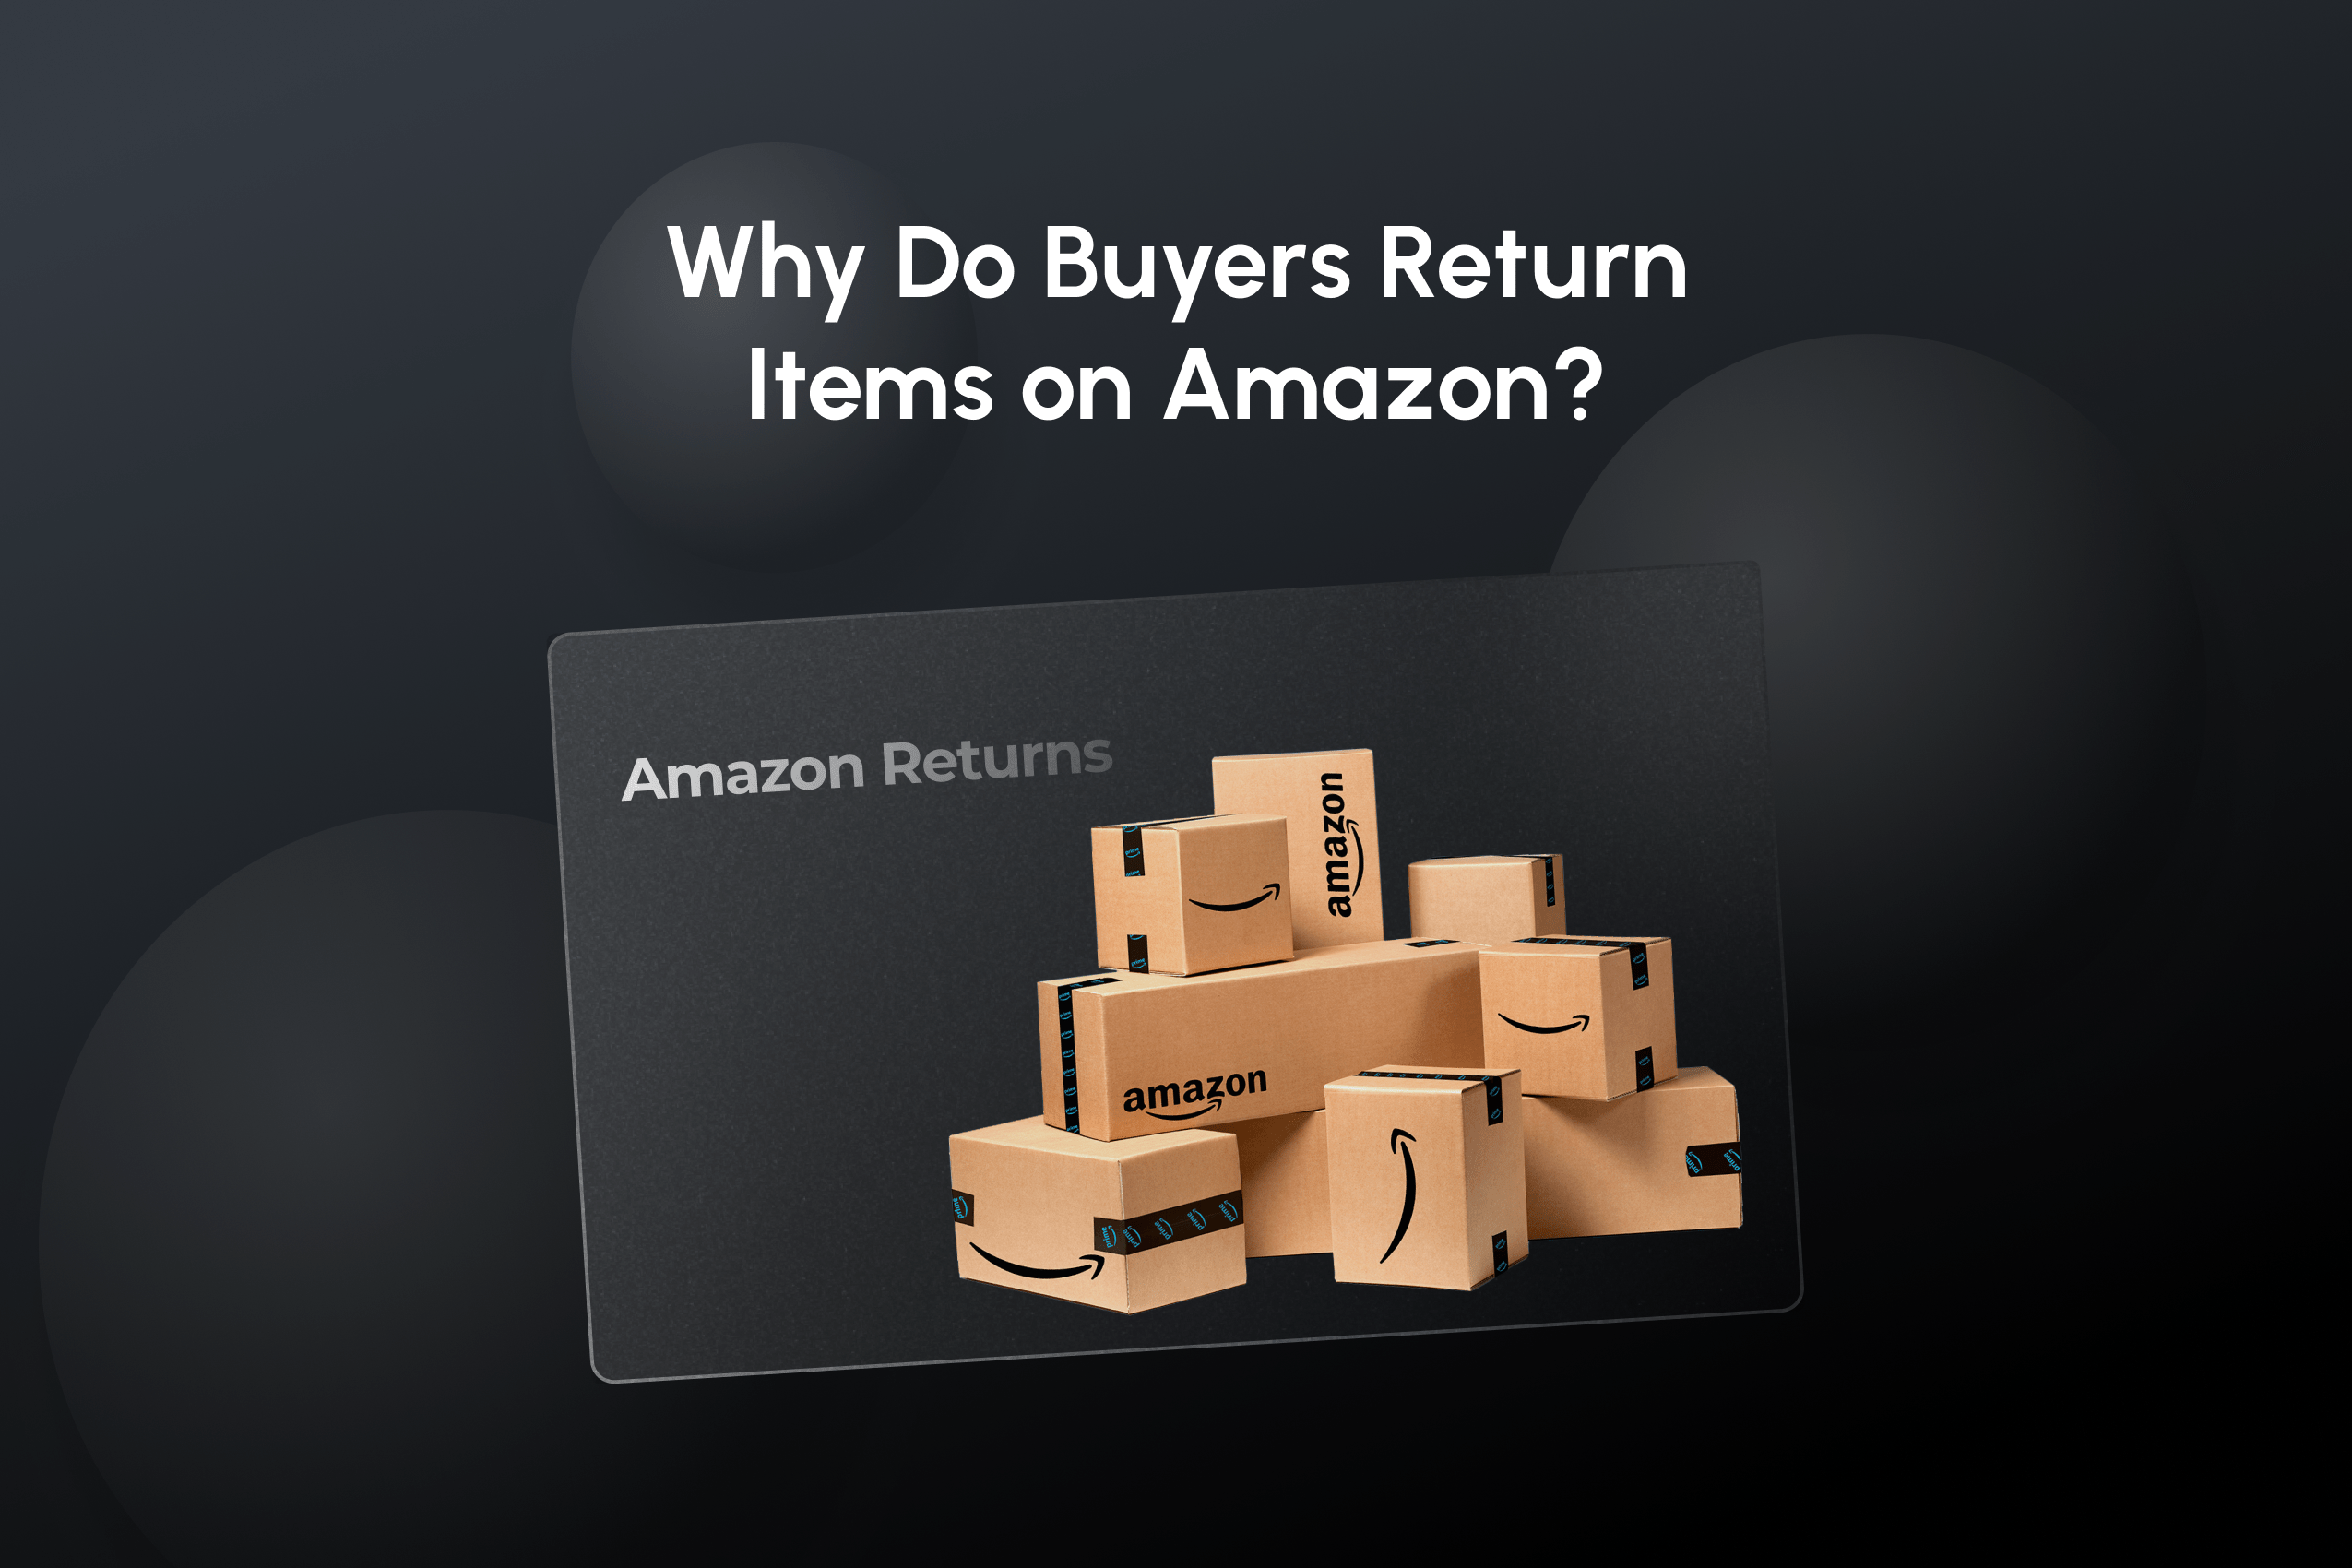 Why Do Buyers Return Items to Amazon FBA Sellers?